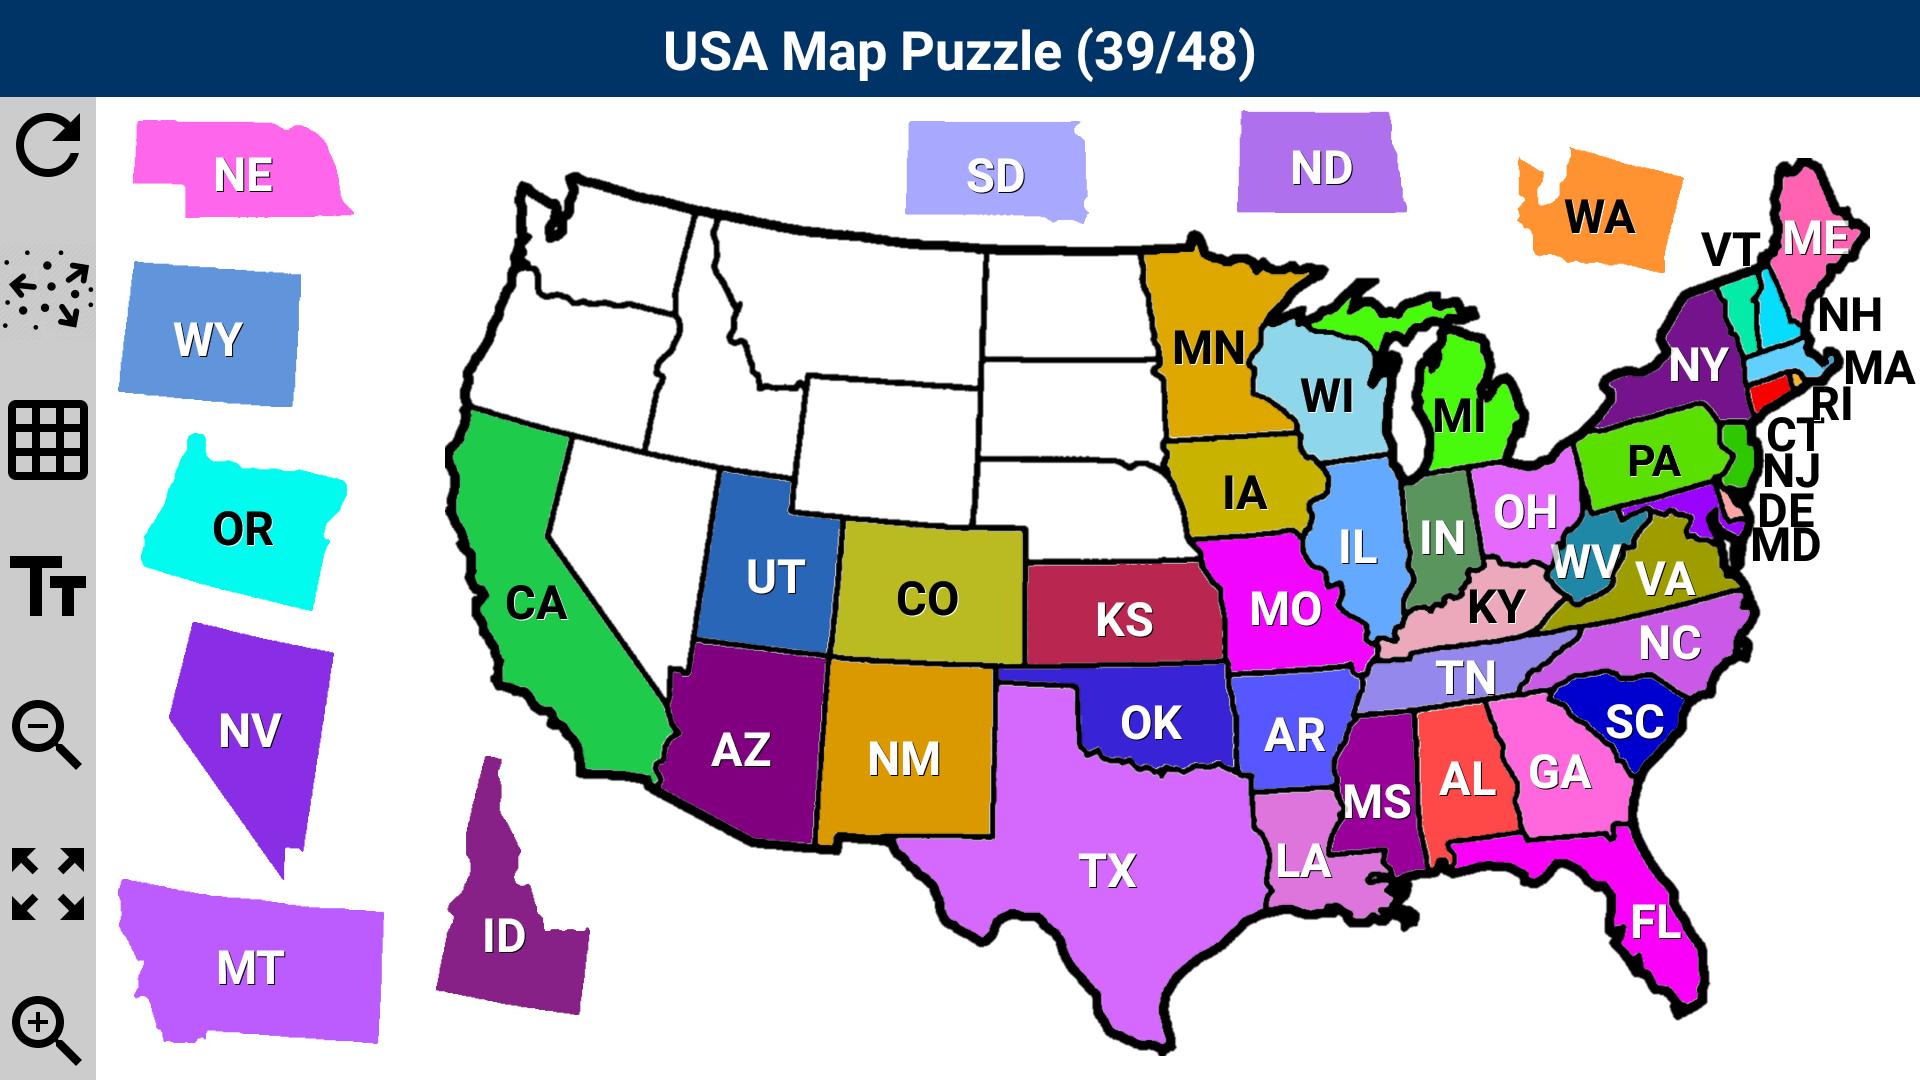 buy-joqutoys-wooden-usa-map-puzzle-46-pieces-us-map-puzzle-for-kids-educational-geography